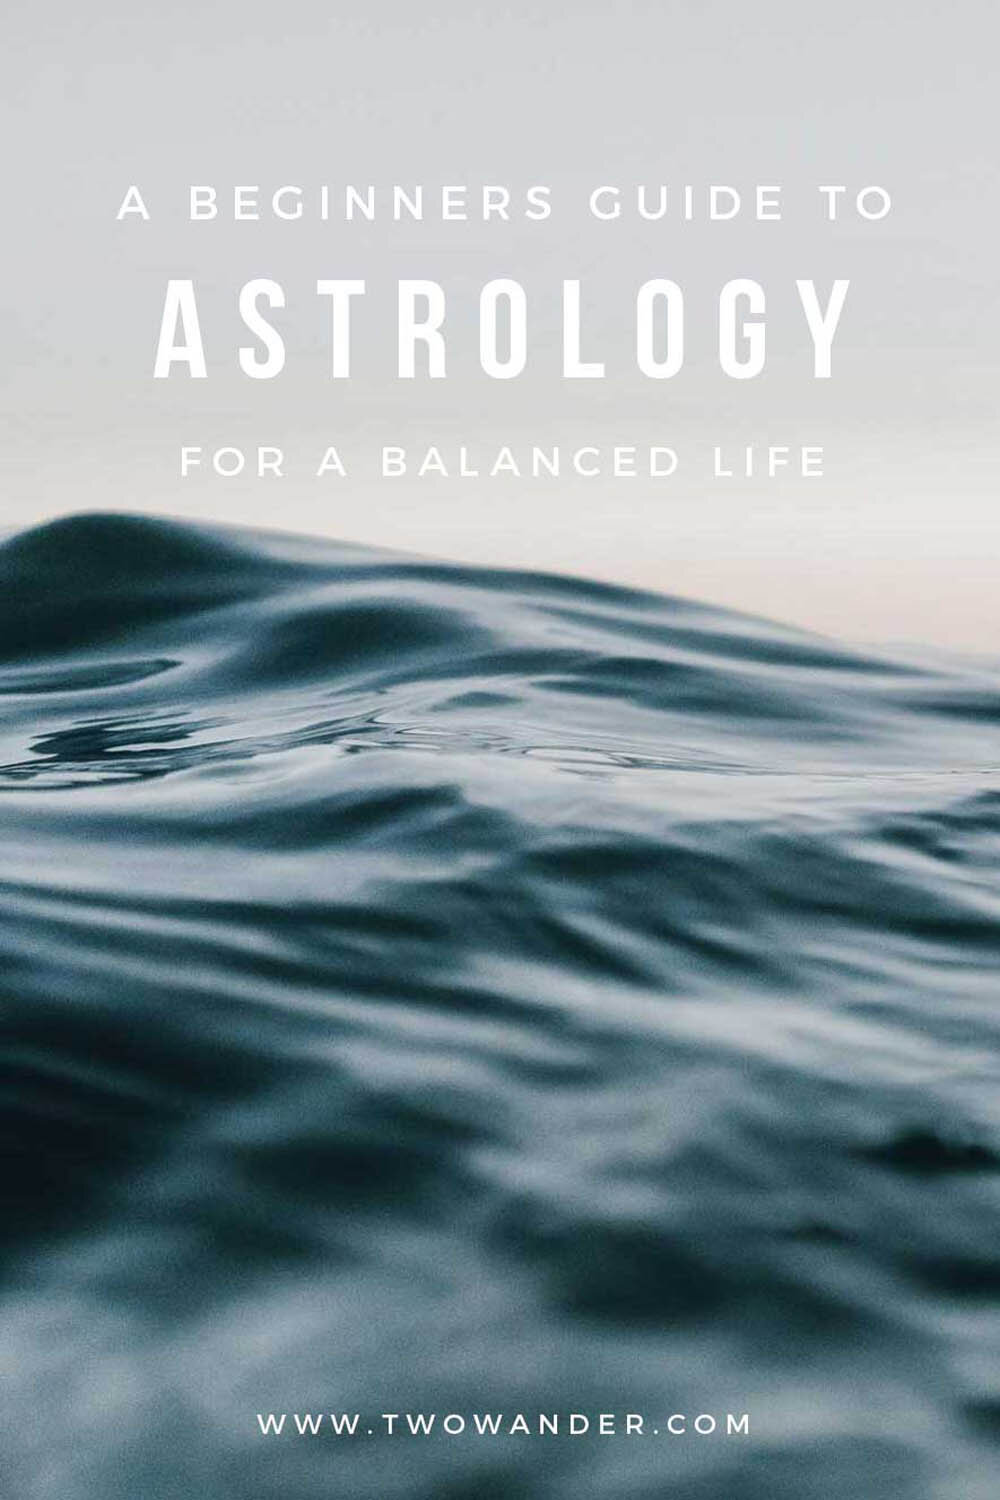 A Beginners Guide To Astrology